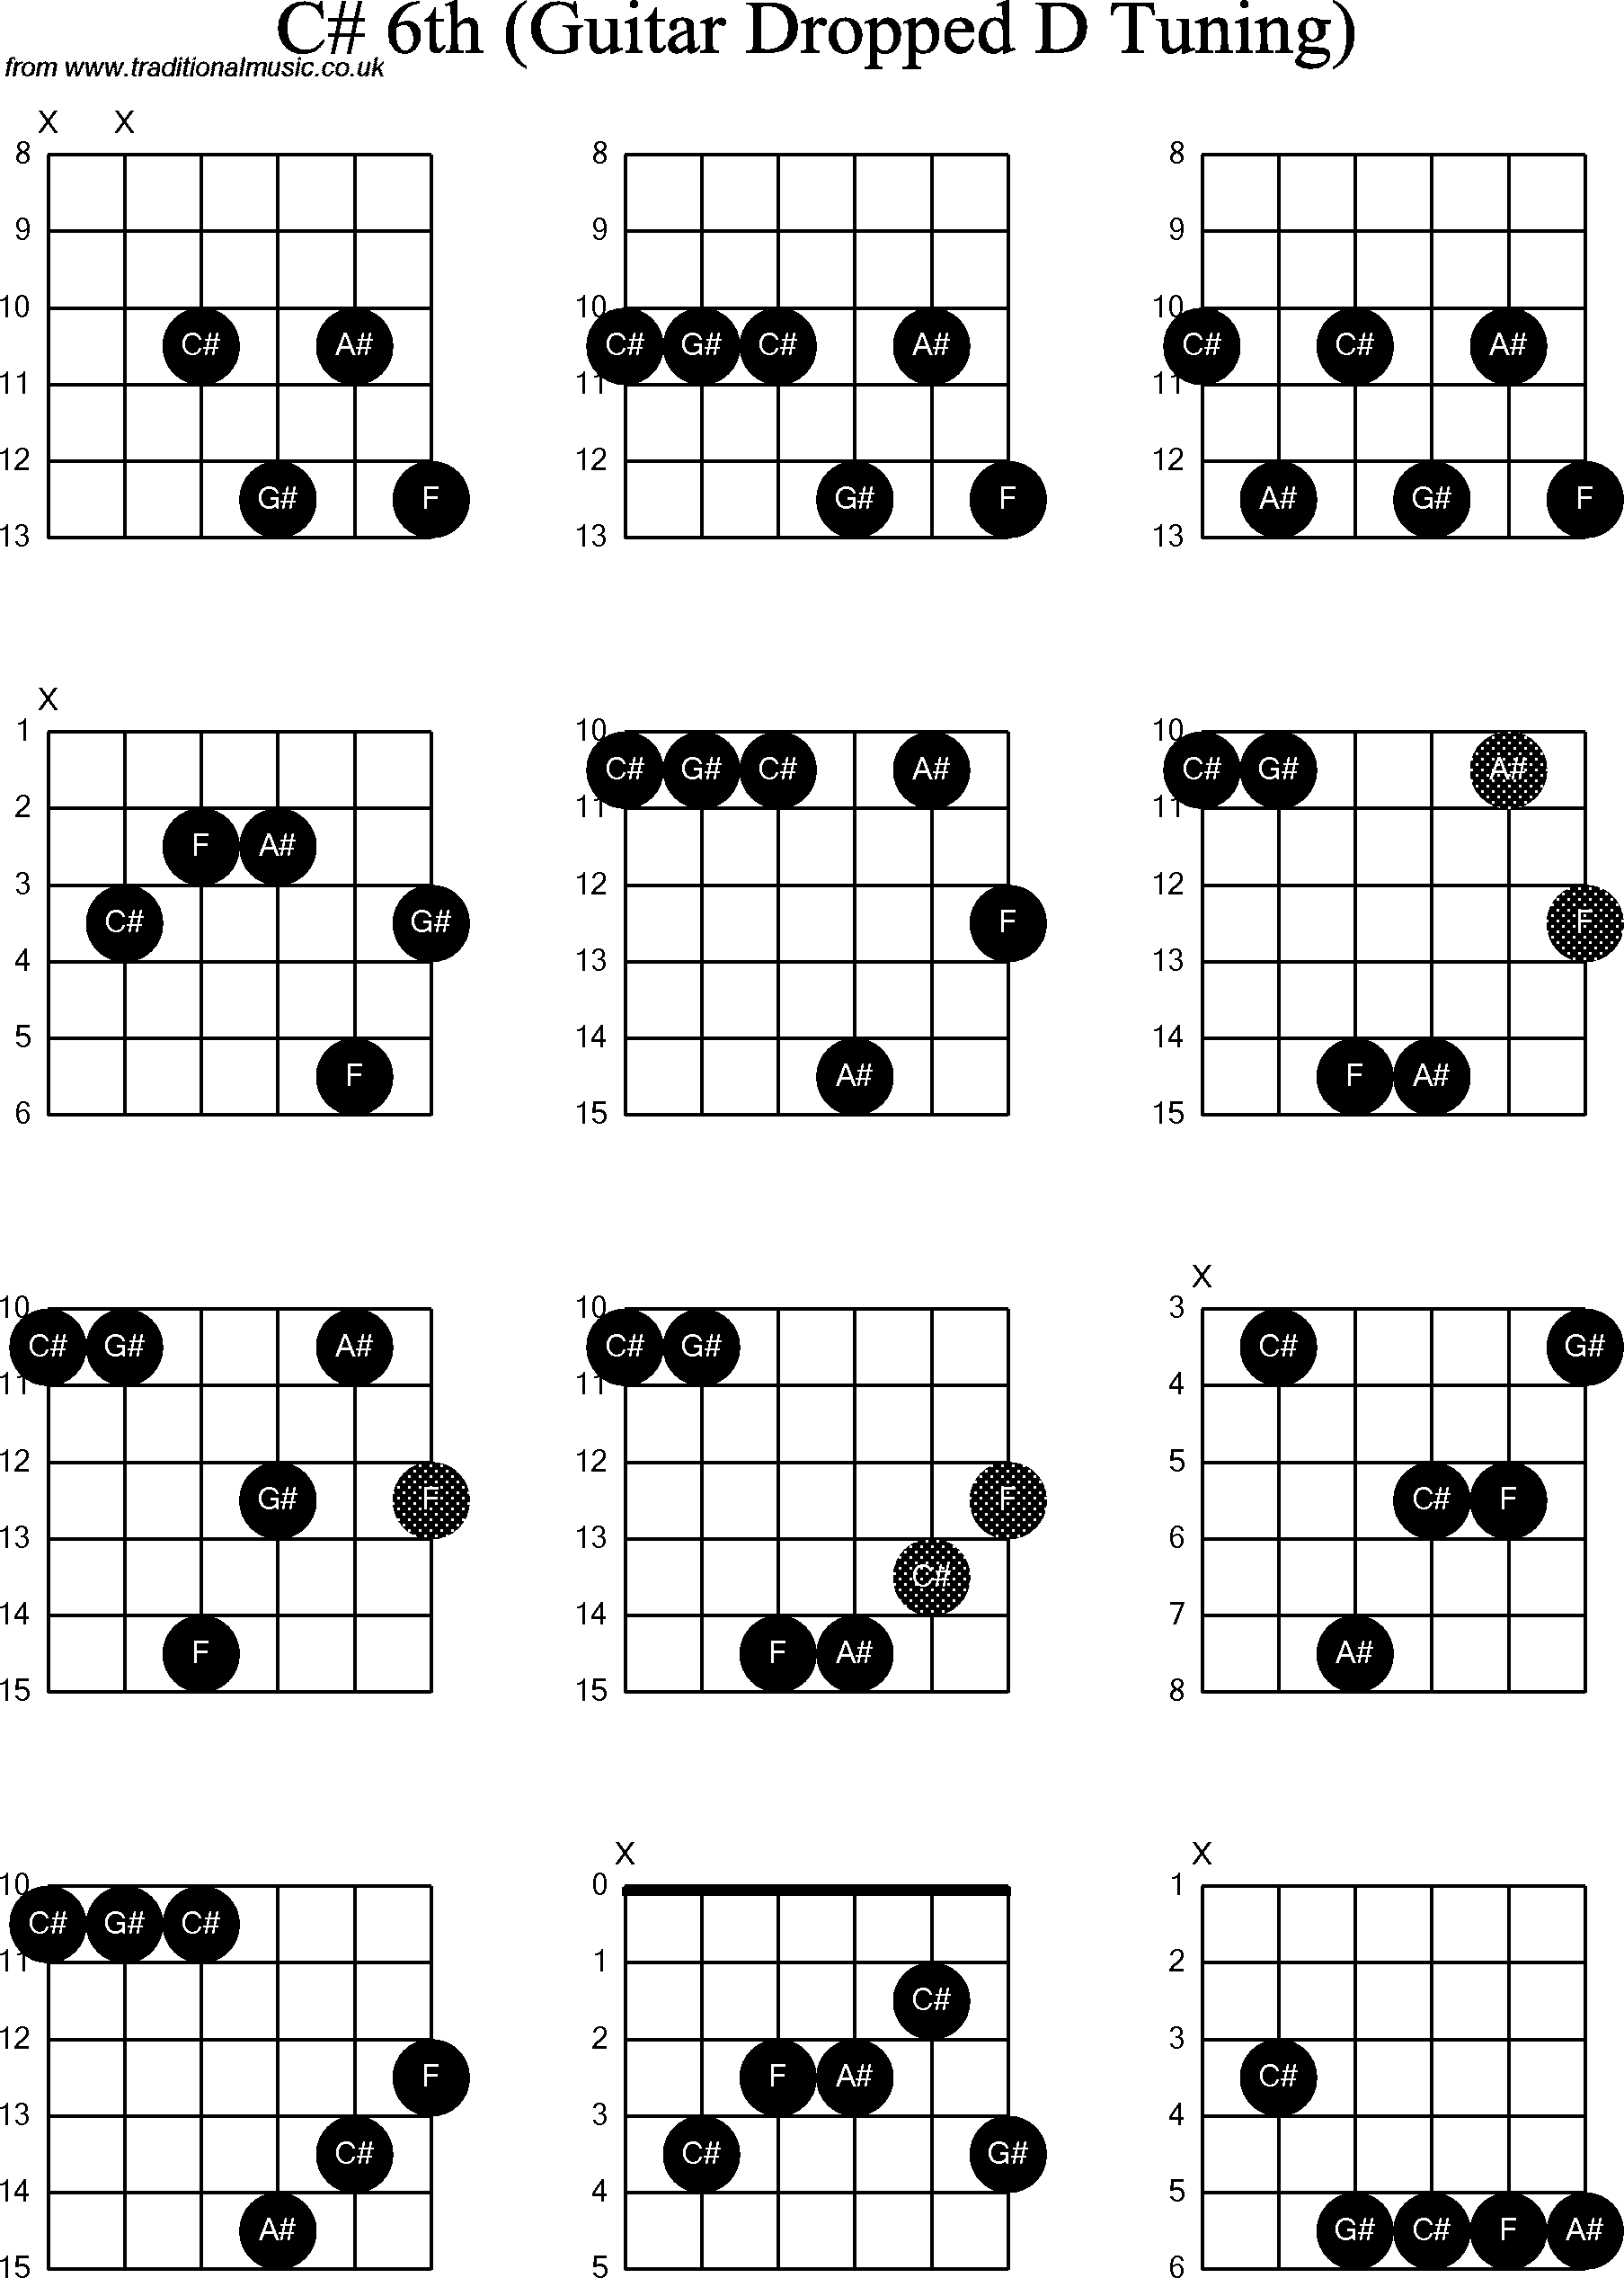 Chord diagrams for dropped D Guitar(DADGBE), C Sharp6th